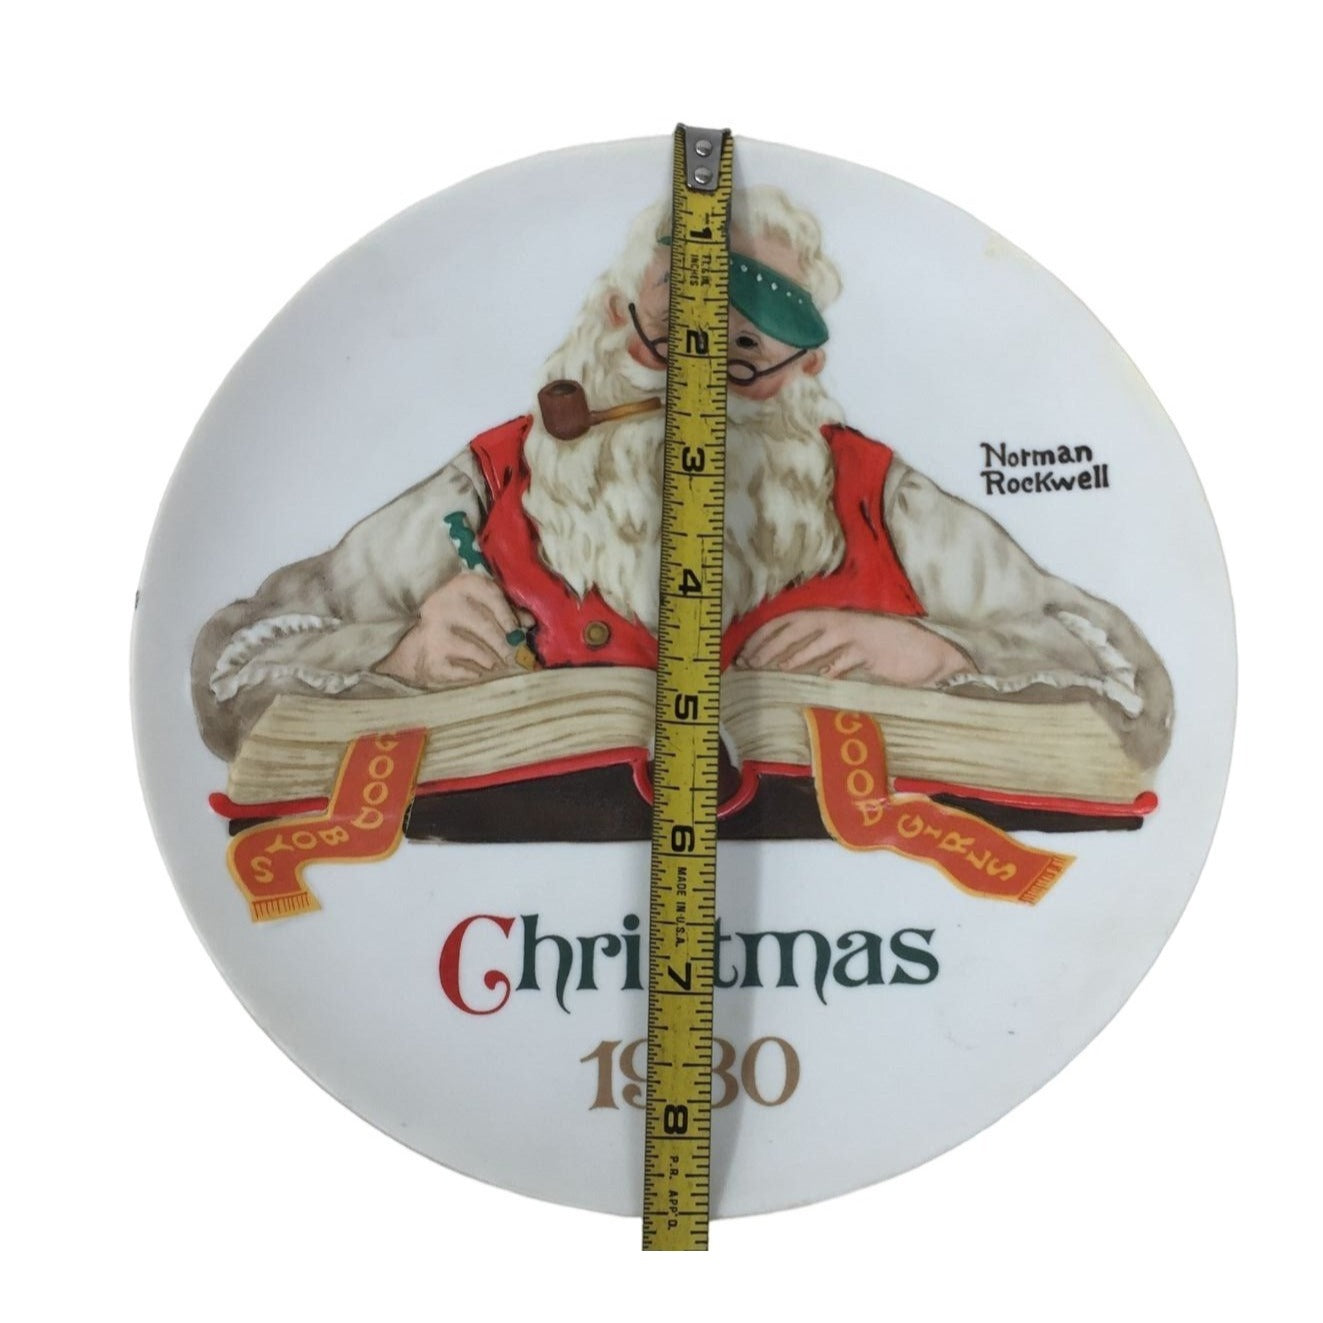 "Checking His List" Norman Rockwell Christmas 1980 Collectible Plate in Box with tags